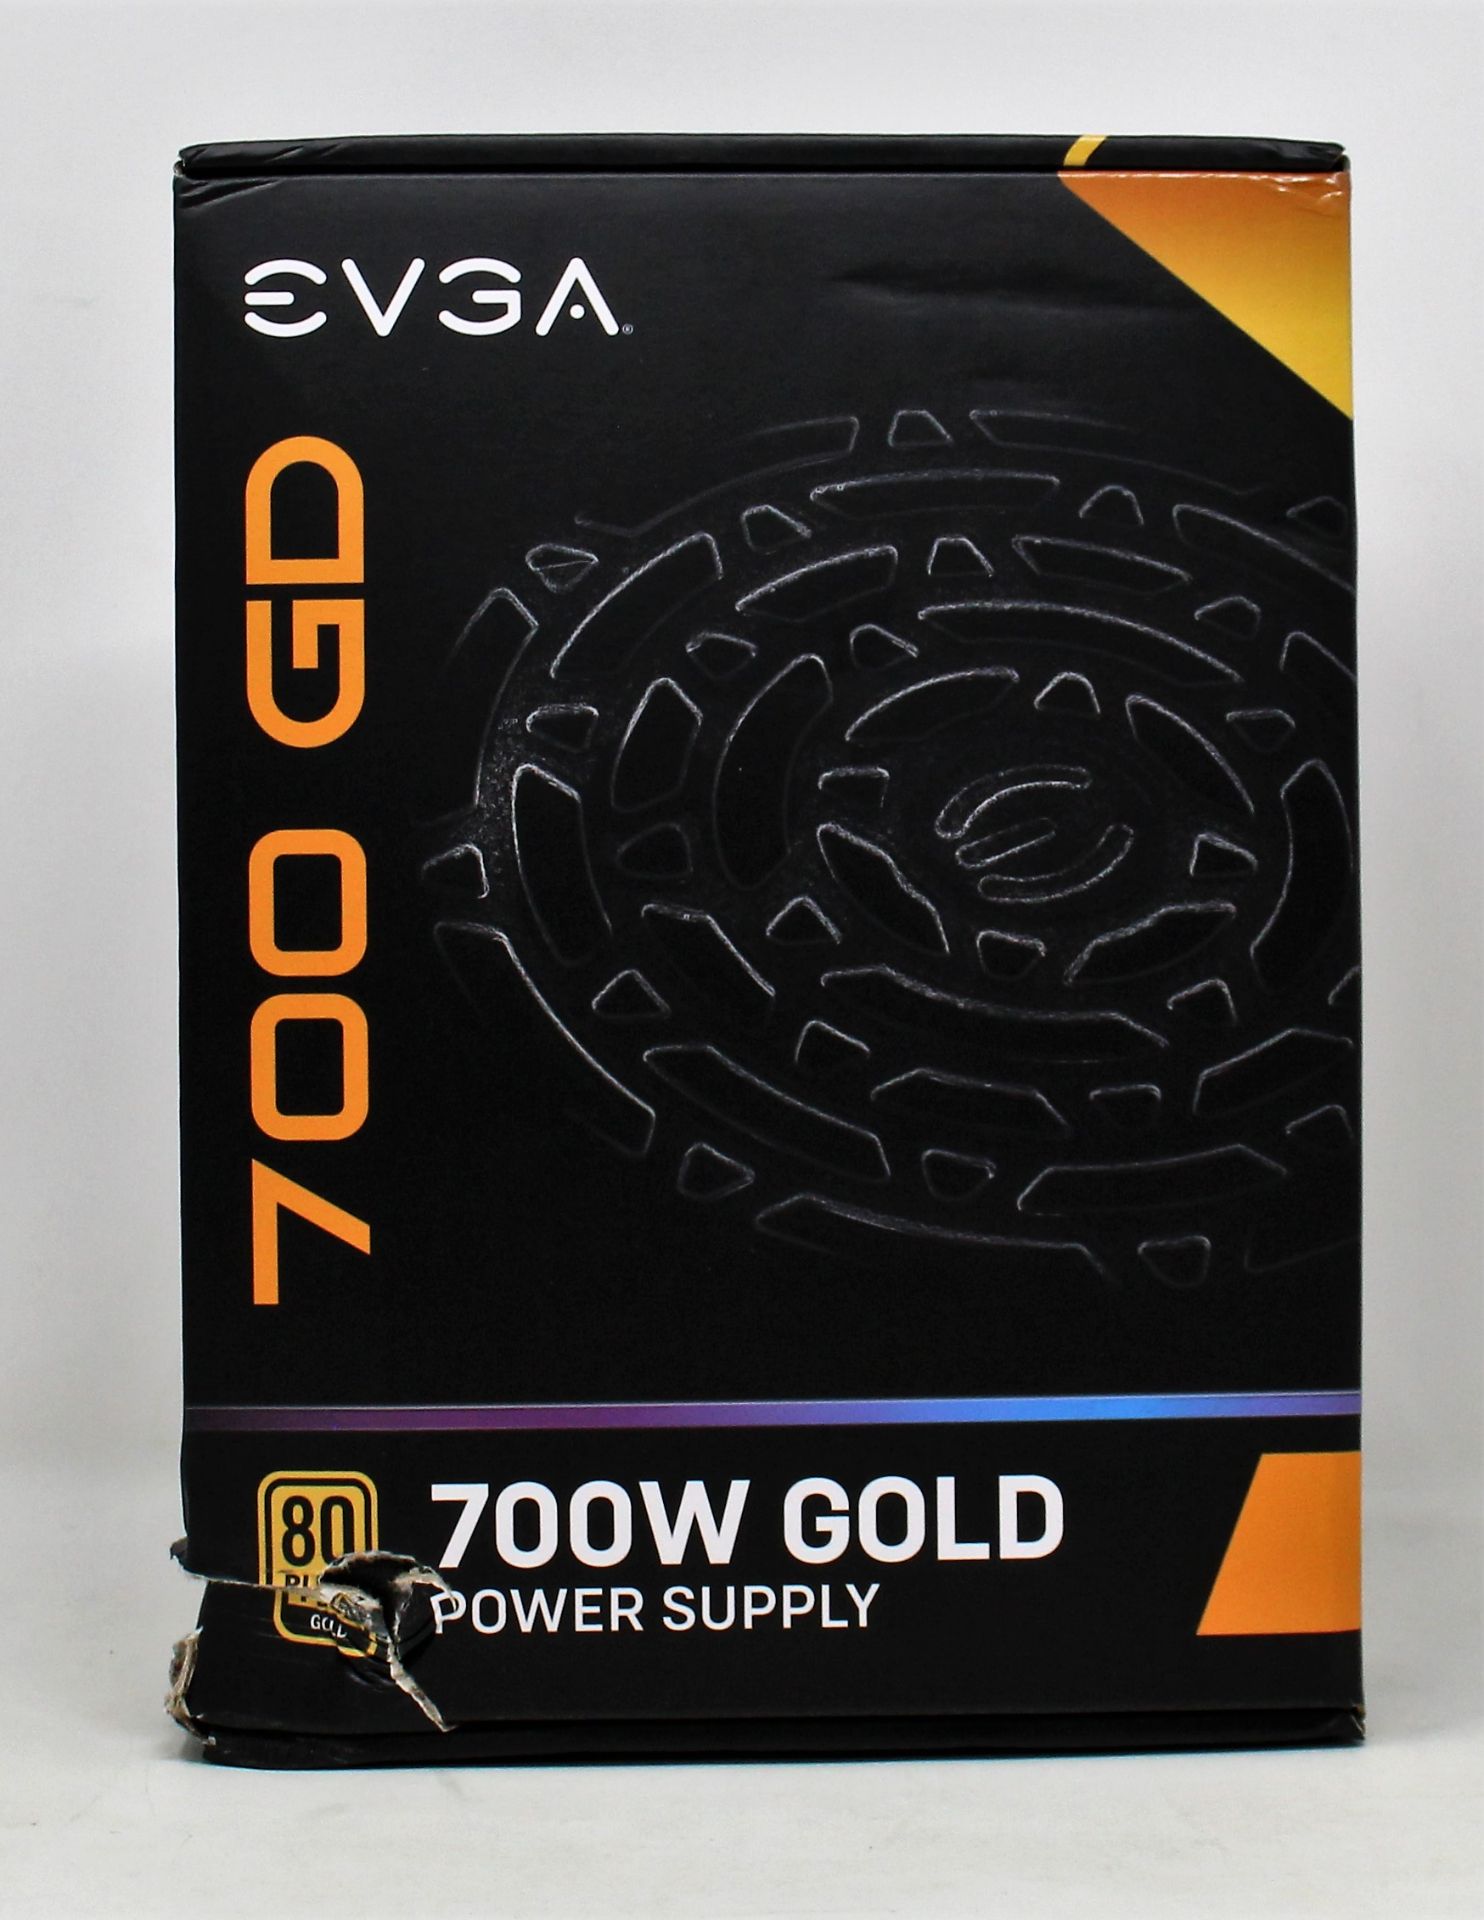 A boxed as new EVGA 700 GD 80+ Gold Power Supply (Box damaged, sealed).